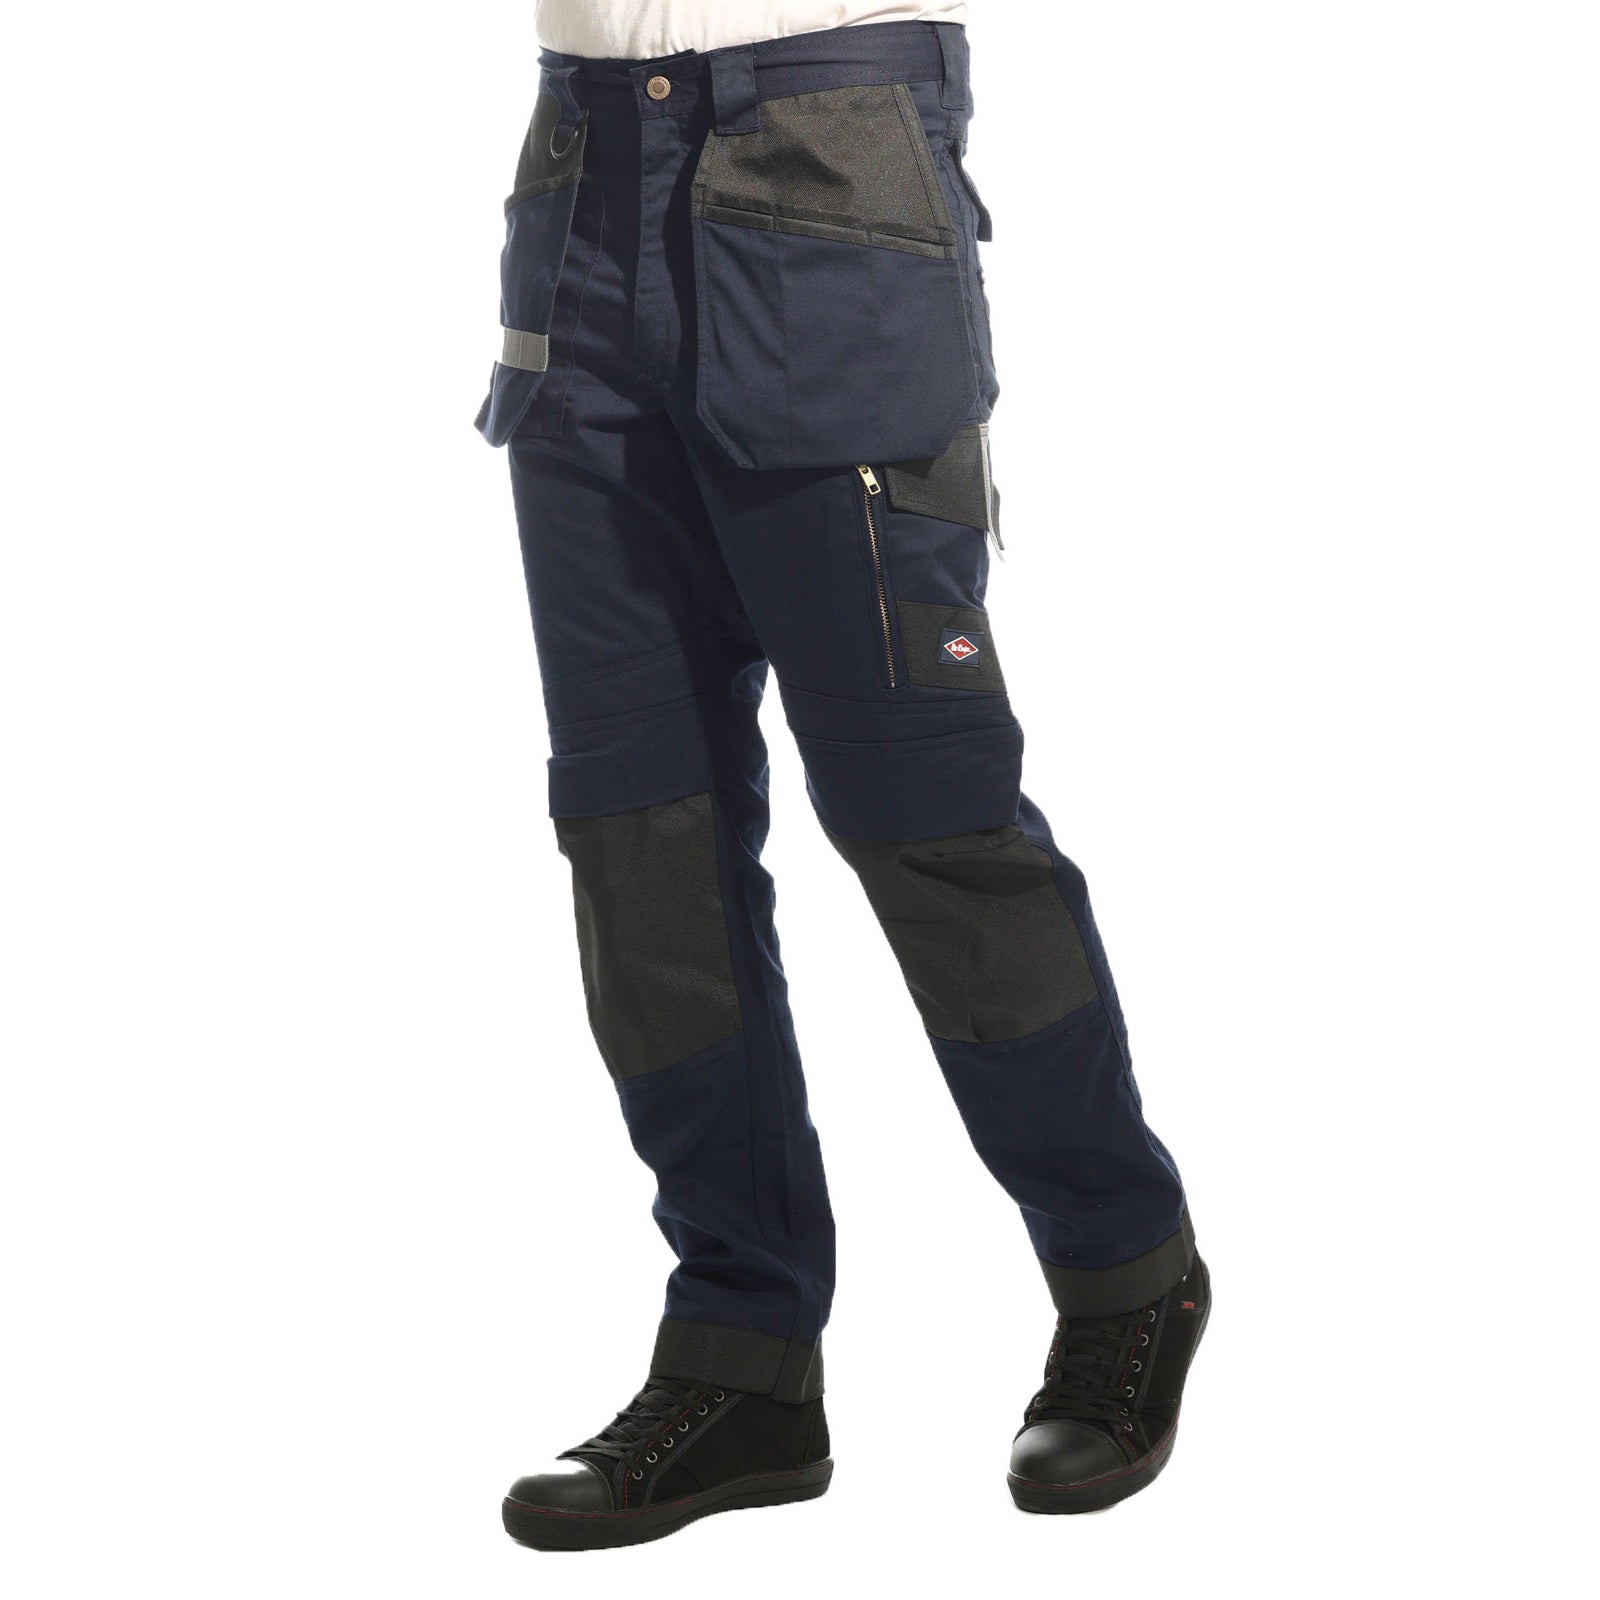 NAVY STRETCH WORK TROUSER SMART & RESILIENT FOR EVERY JOB (LCPNT245N)